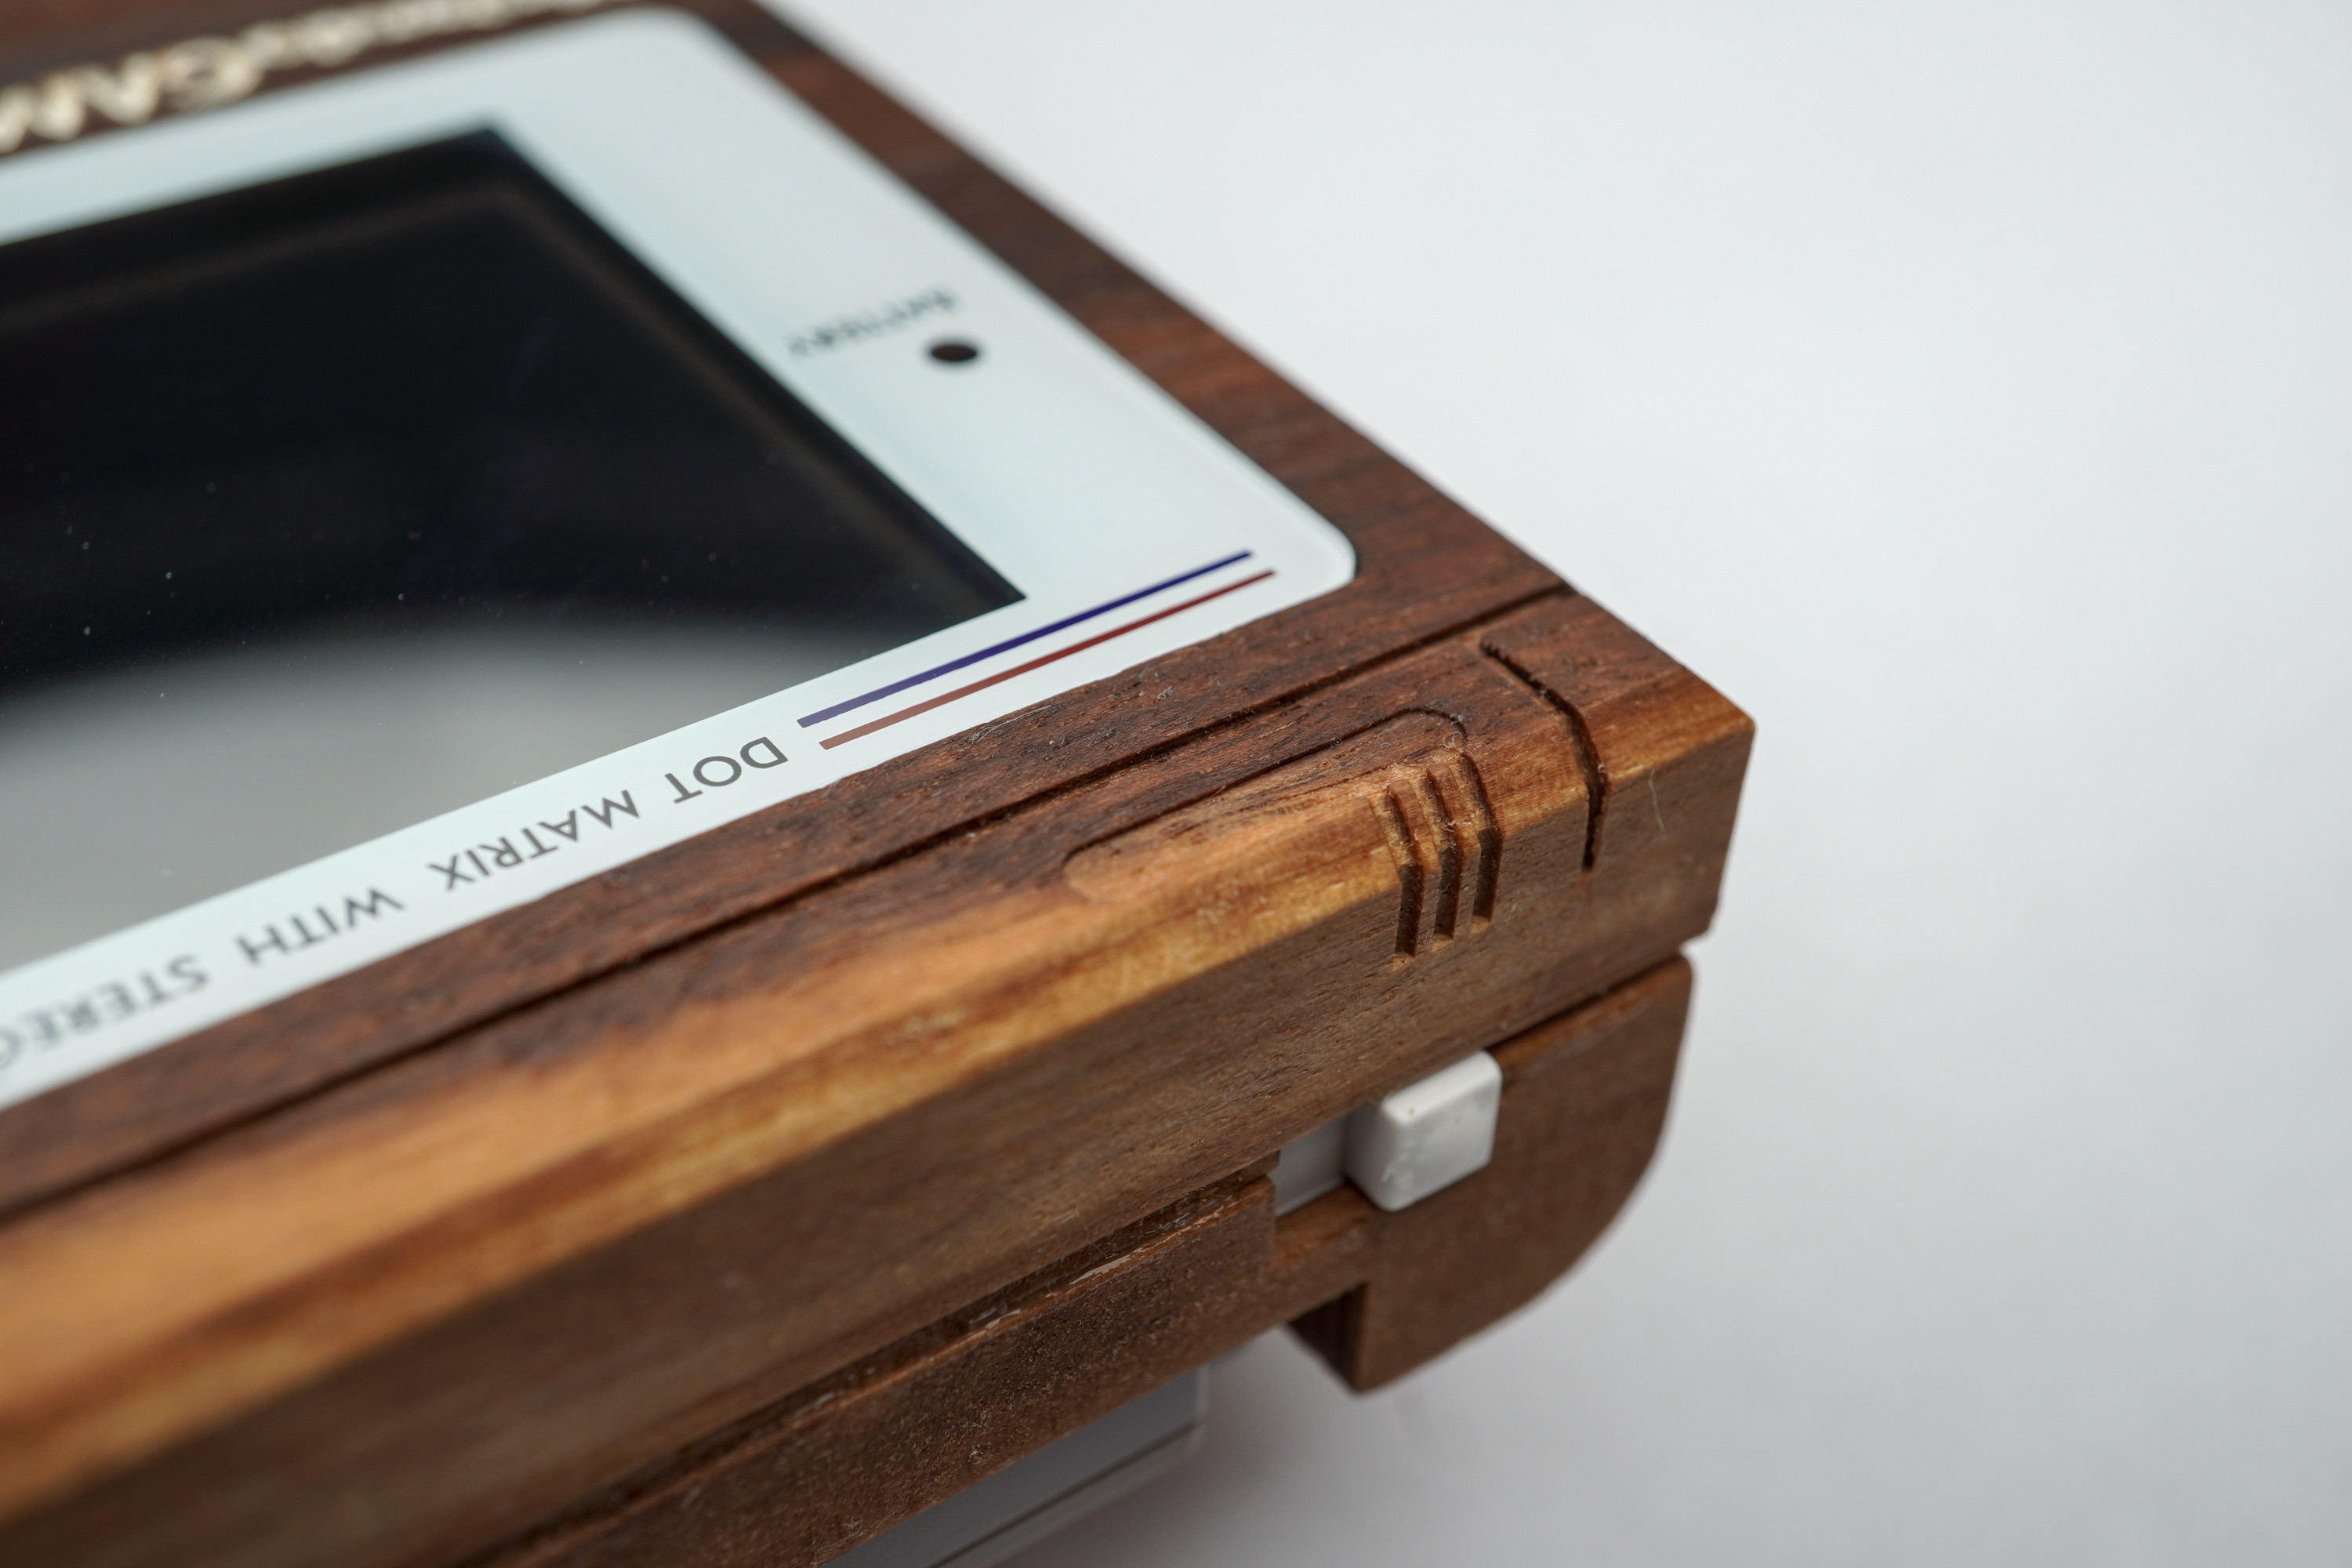 Detail shot of the power switch at the top of the wooden Game Boy. The shot also shows the white screen bezel and the detailed decorative lines that are part of the recognizable design of the original Game Boy.